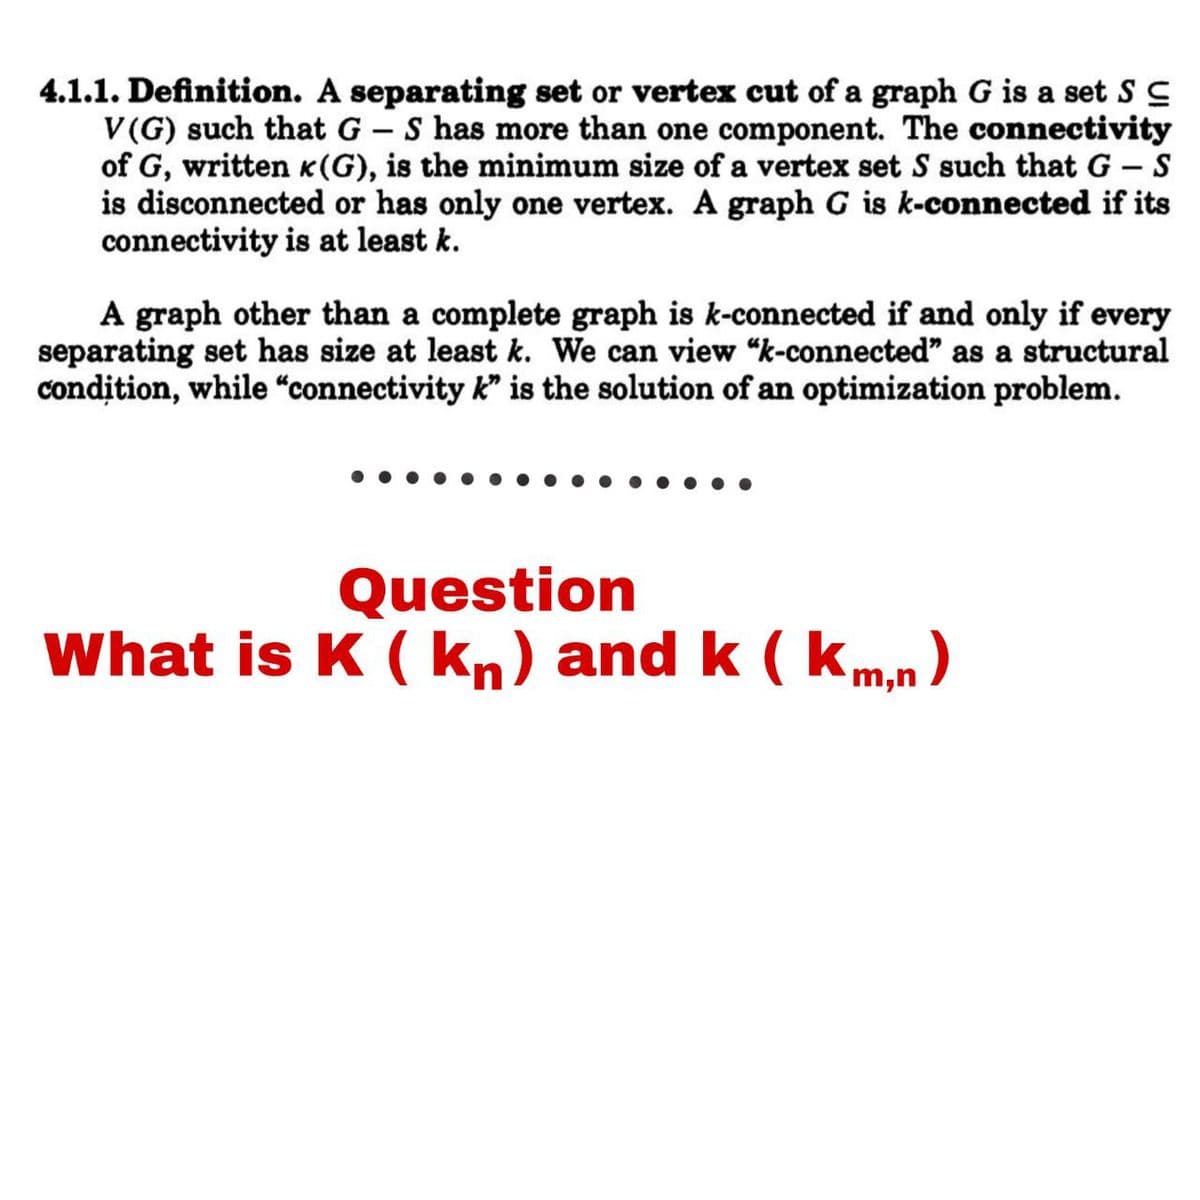 4.1.1. Definition. A separating set or vertex cut of a graph G is a set S C
V(G) such that G – S has more than one component. The connectivity
of G, written K(G), is the minimum size of a vertex set S such that G – S
is disconnected or has only one vertex. A graph G is k-connected if its
connectivity is at least k.
A graph other than a complete graph is k-connected if and only if every
separating set has size at least k. We can view “k-connected" as a structural
condition, while “connectivity k" is the solution of an optimization problem.
Question
What is K ( kn) and k ( km,n)
